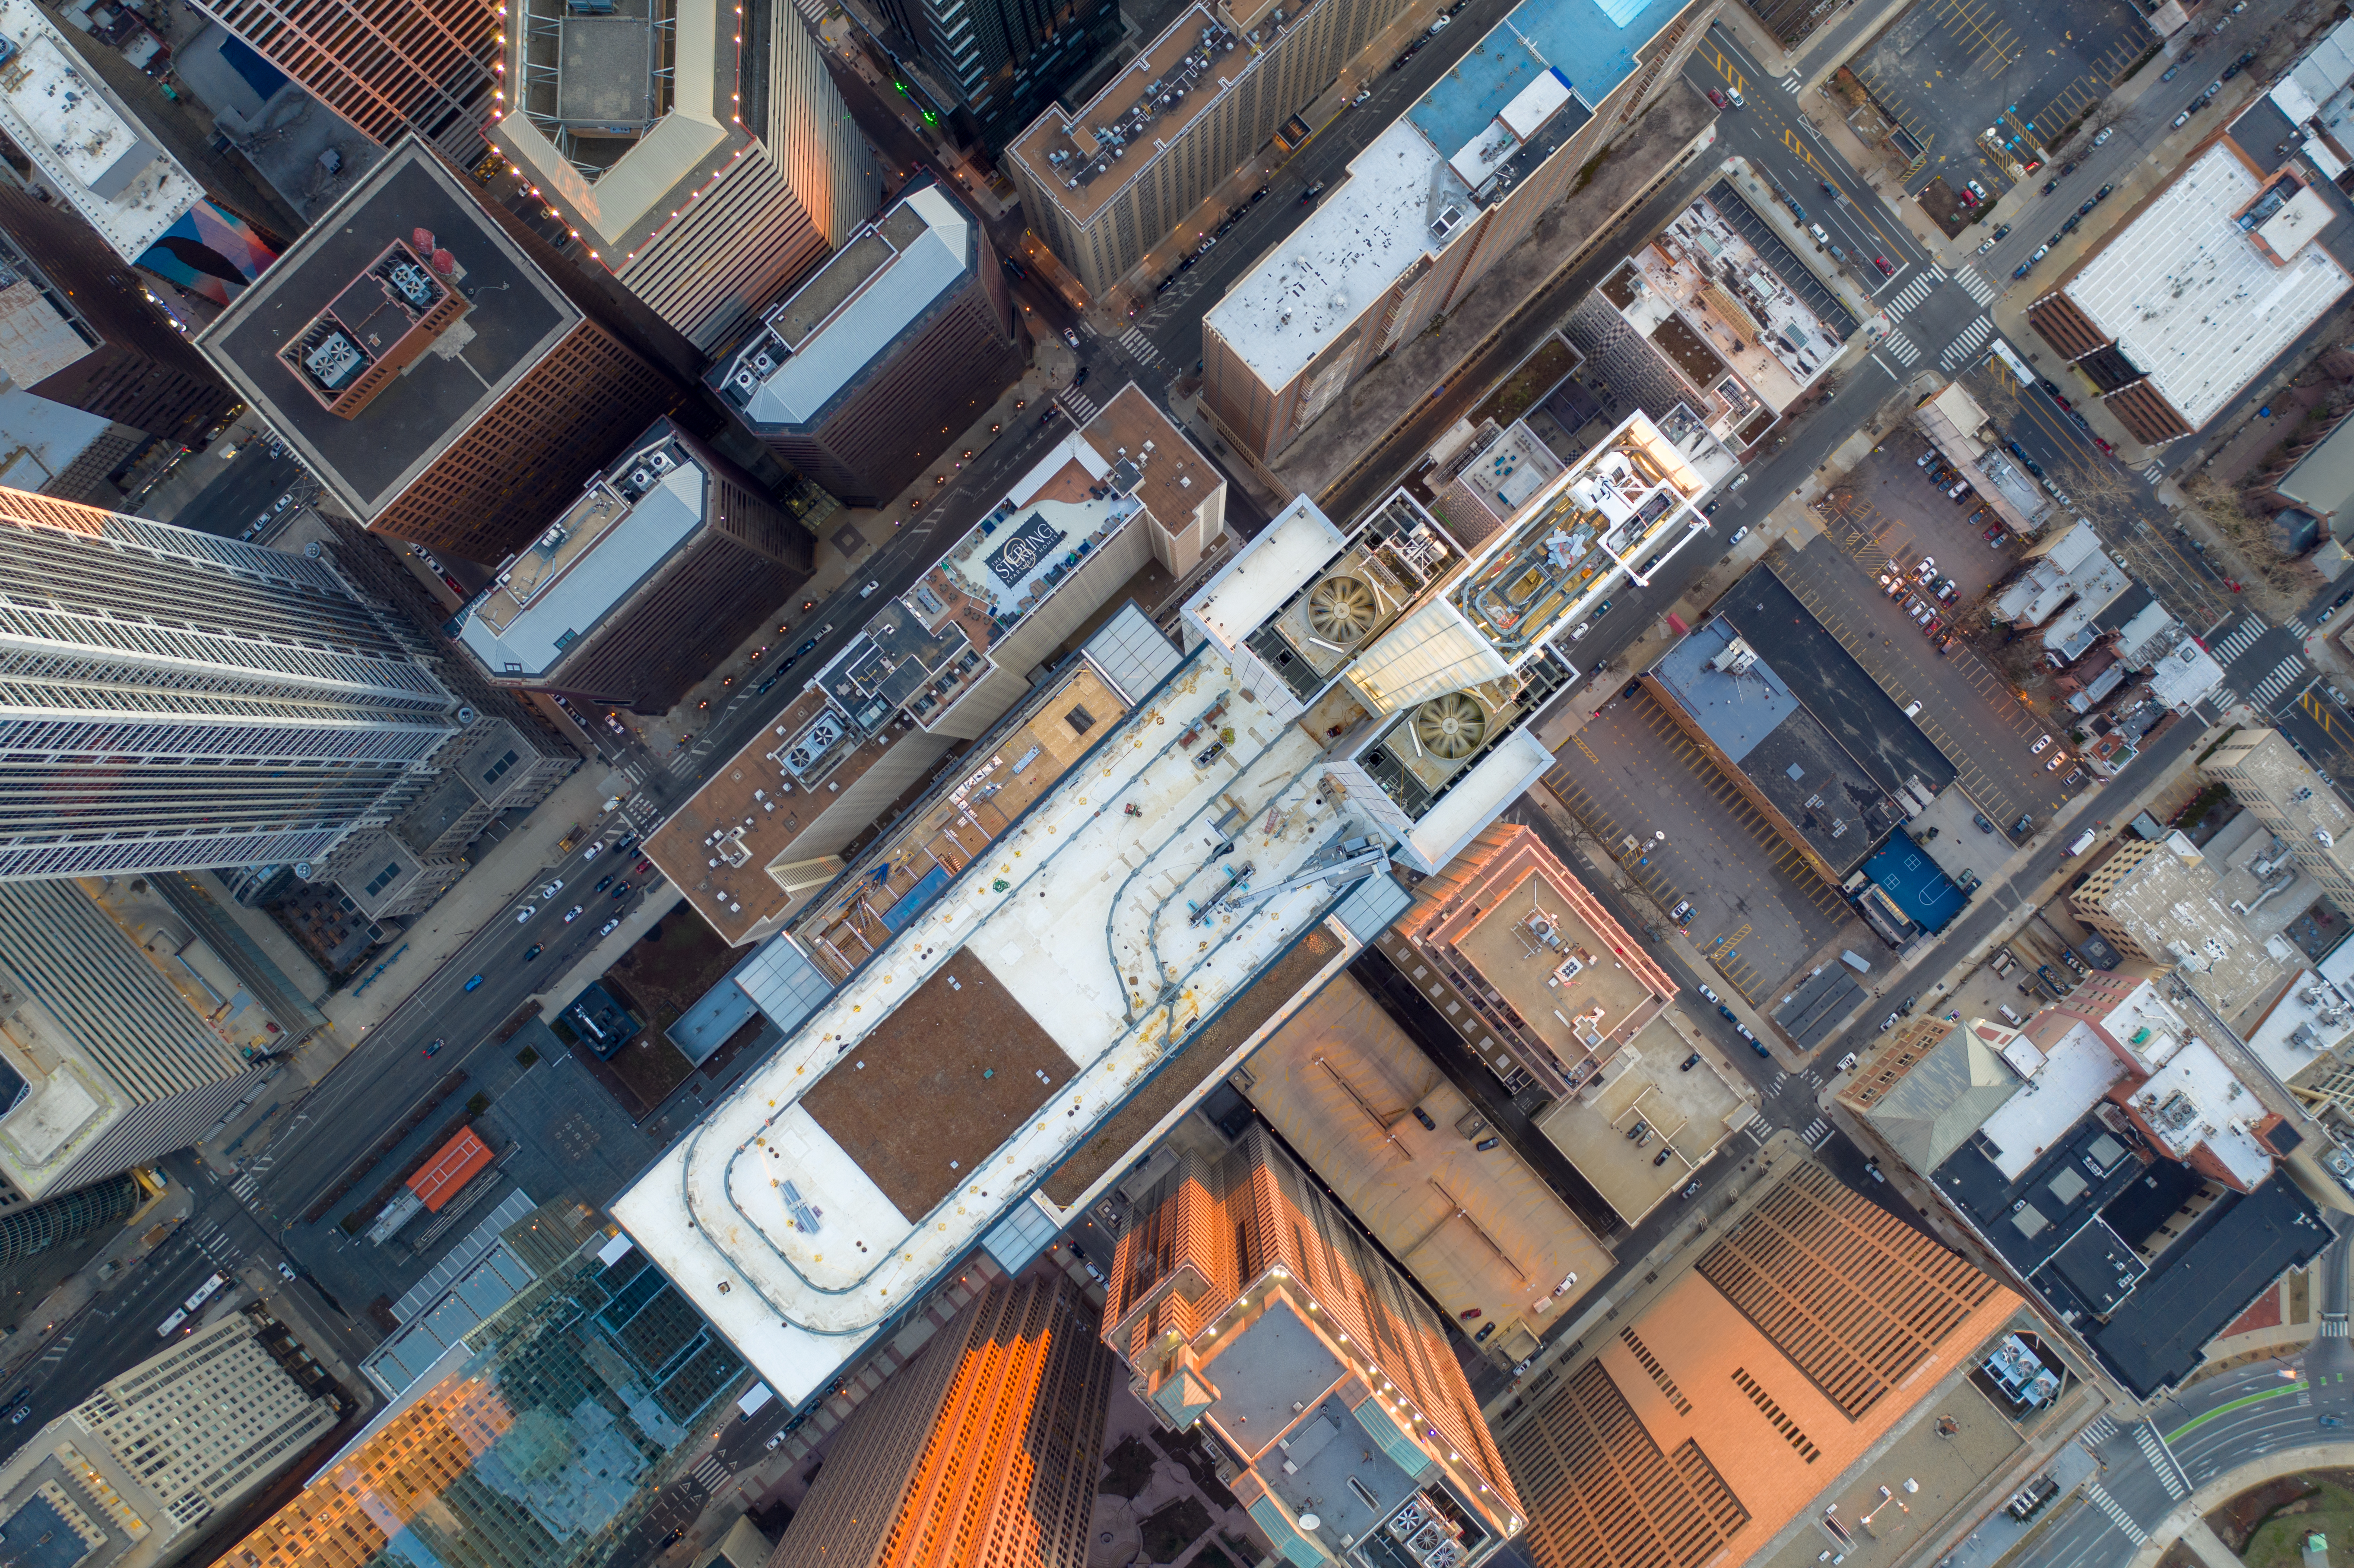 The Comcast technology center from above